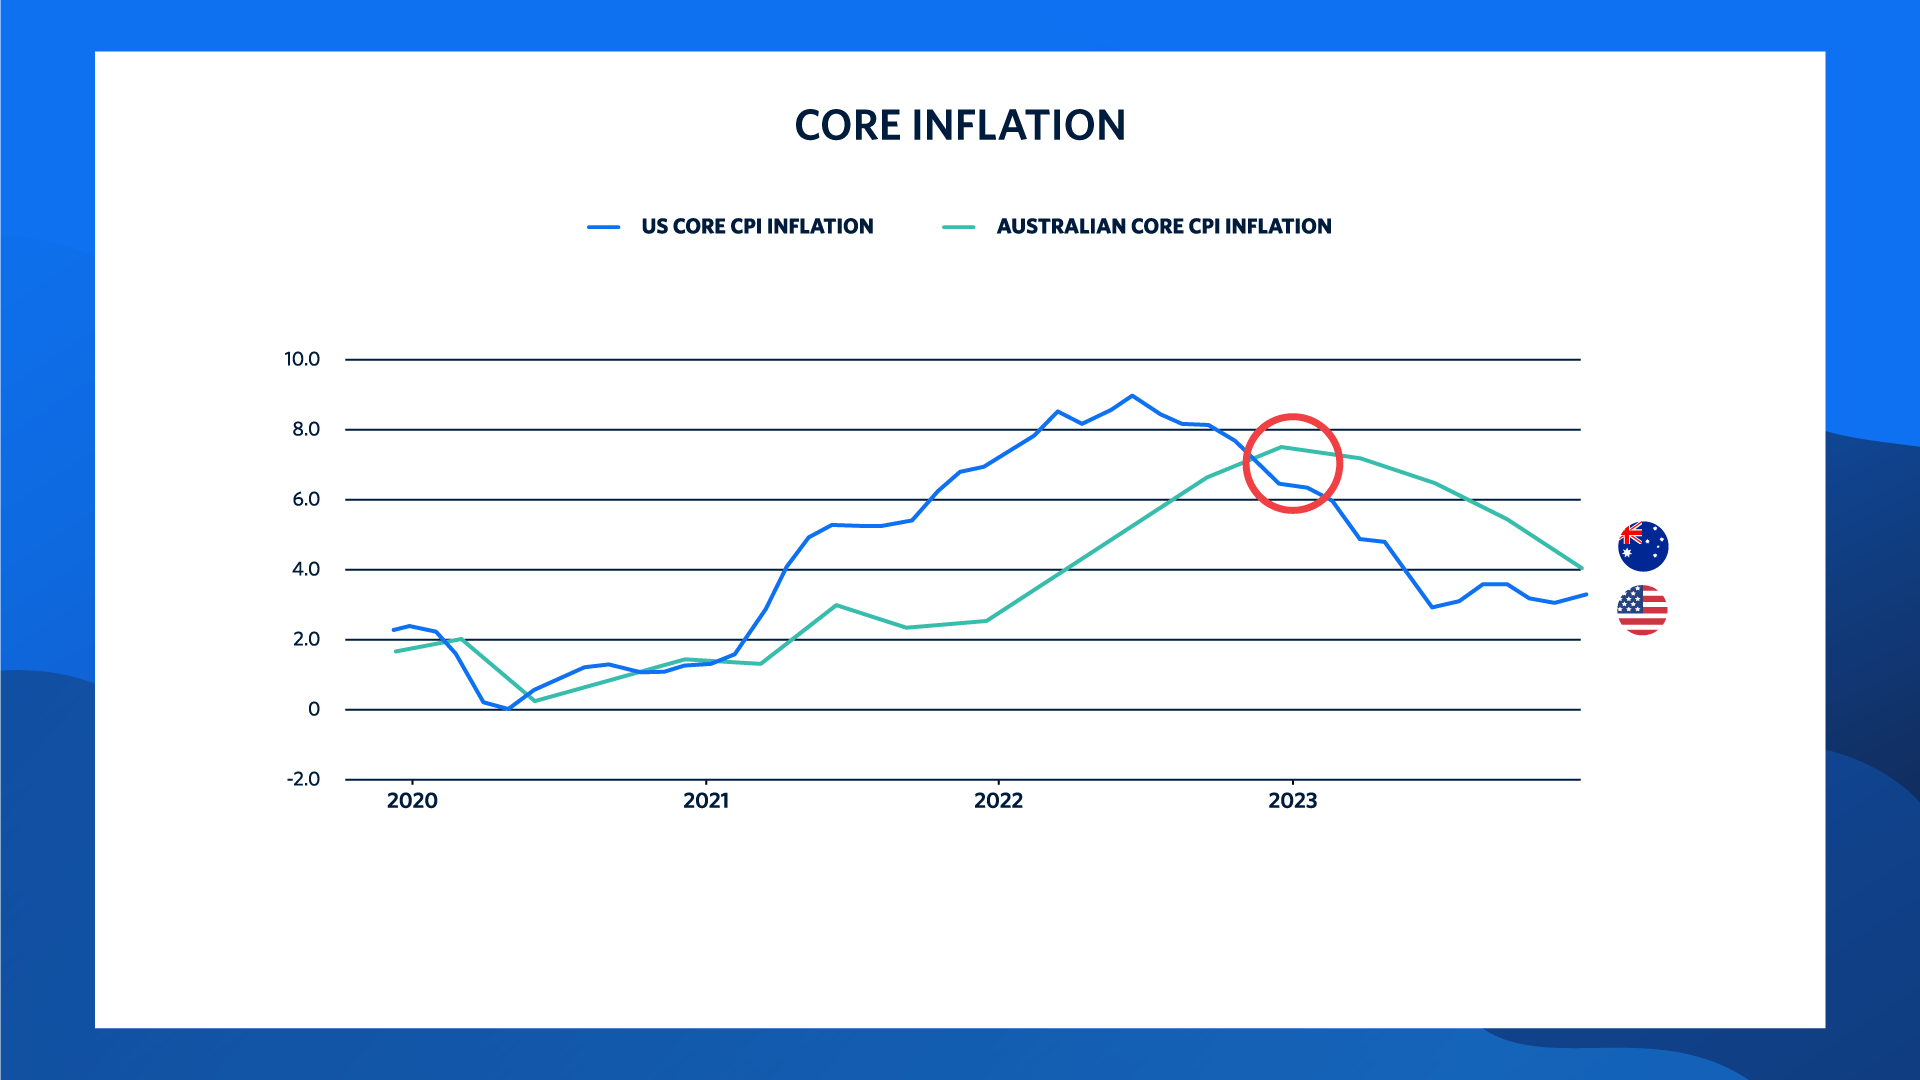 Chart 3: A graph compares core inflation in Australia and the US from 2020 to 2024.